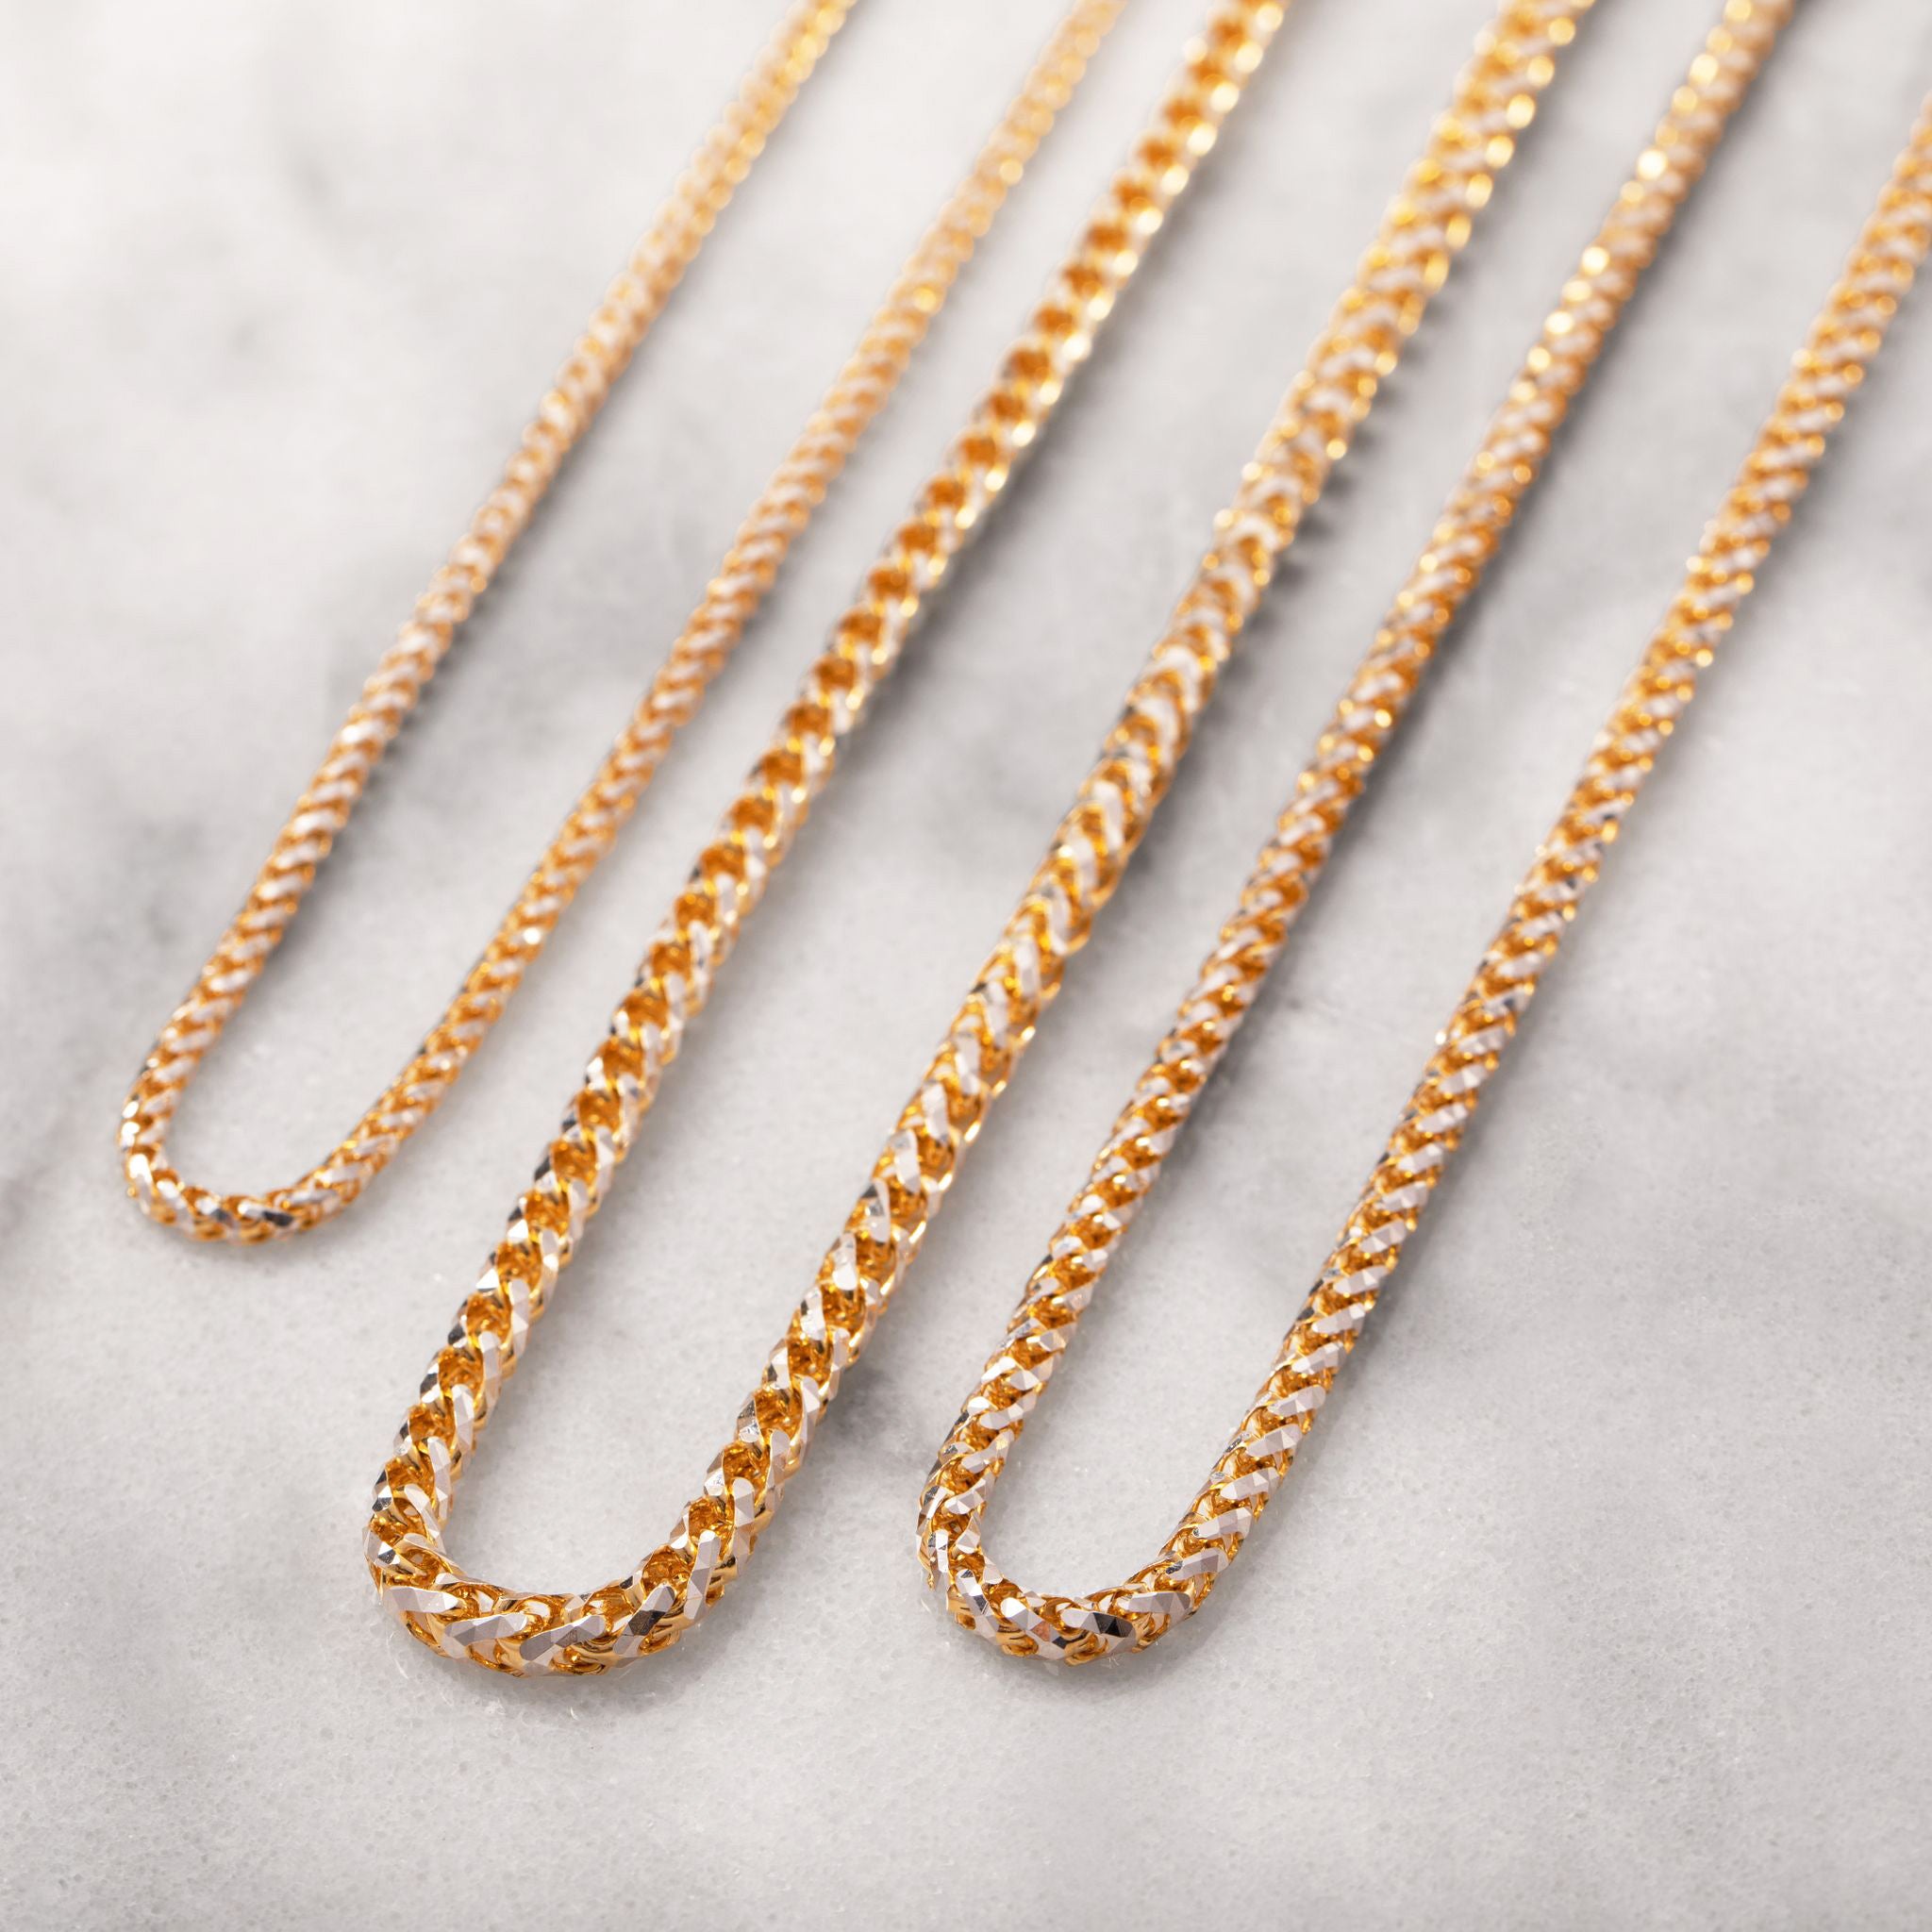 4mm Prism Cut Franco Chain, 14K Gold Chain Men’s, Solid Gold Chain 24 Inches